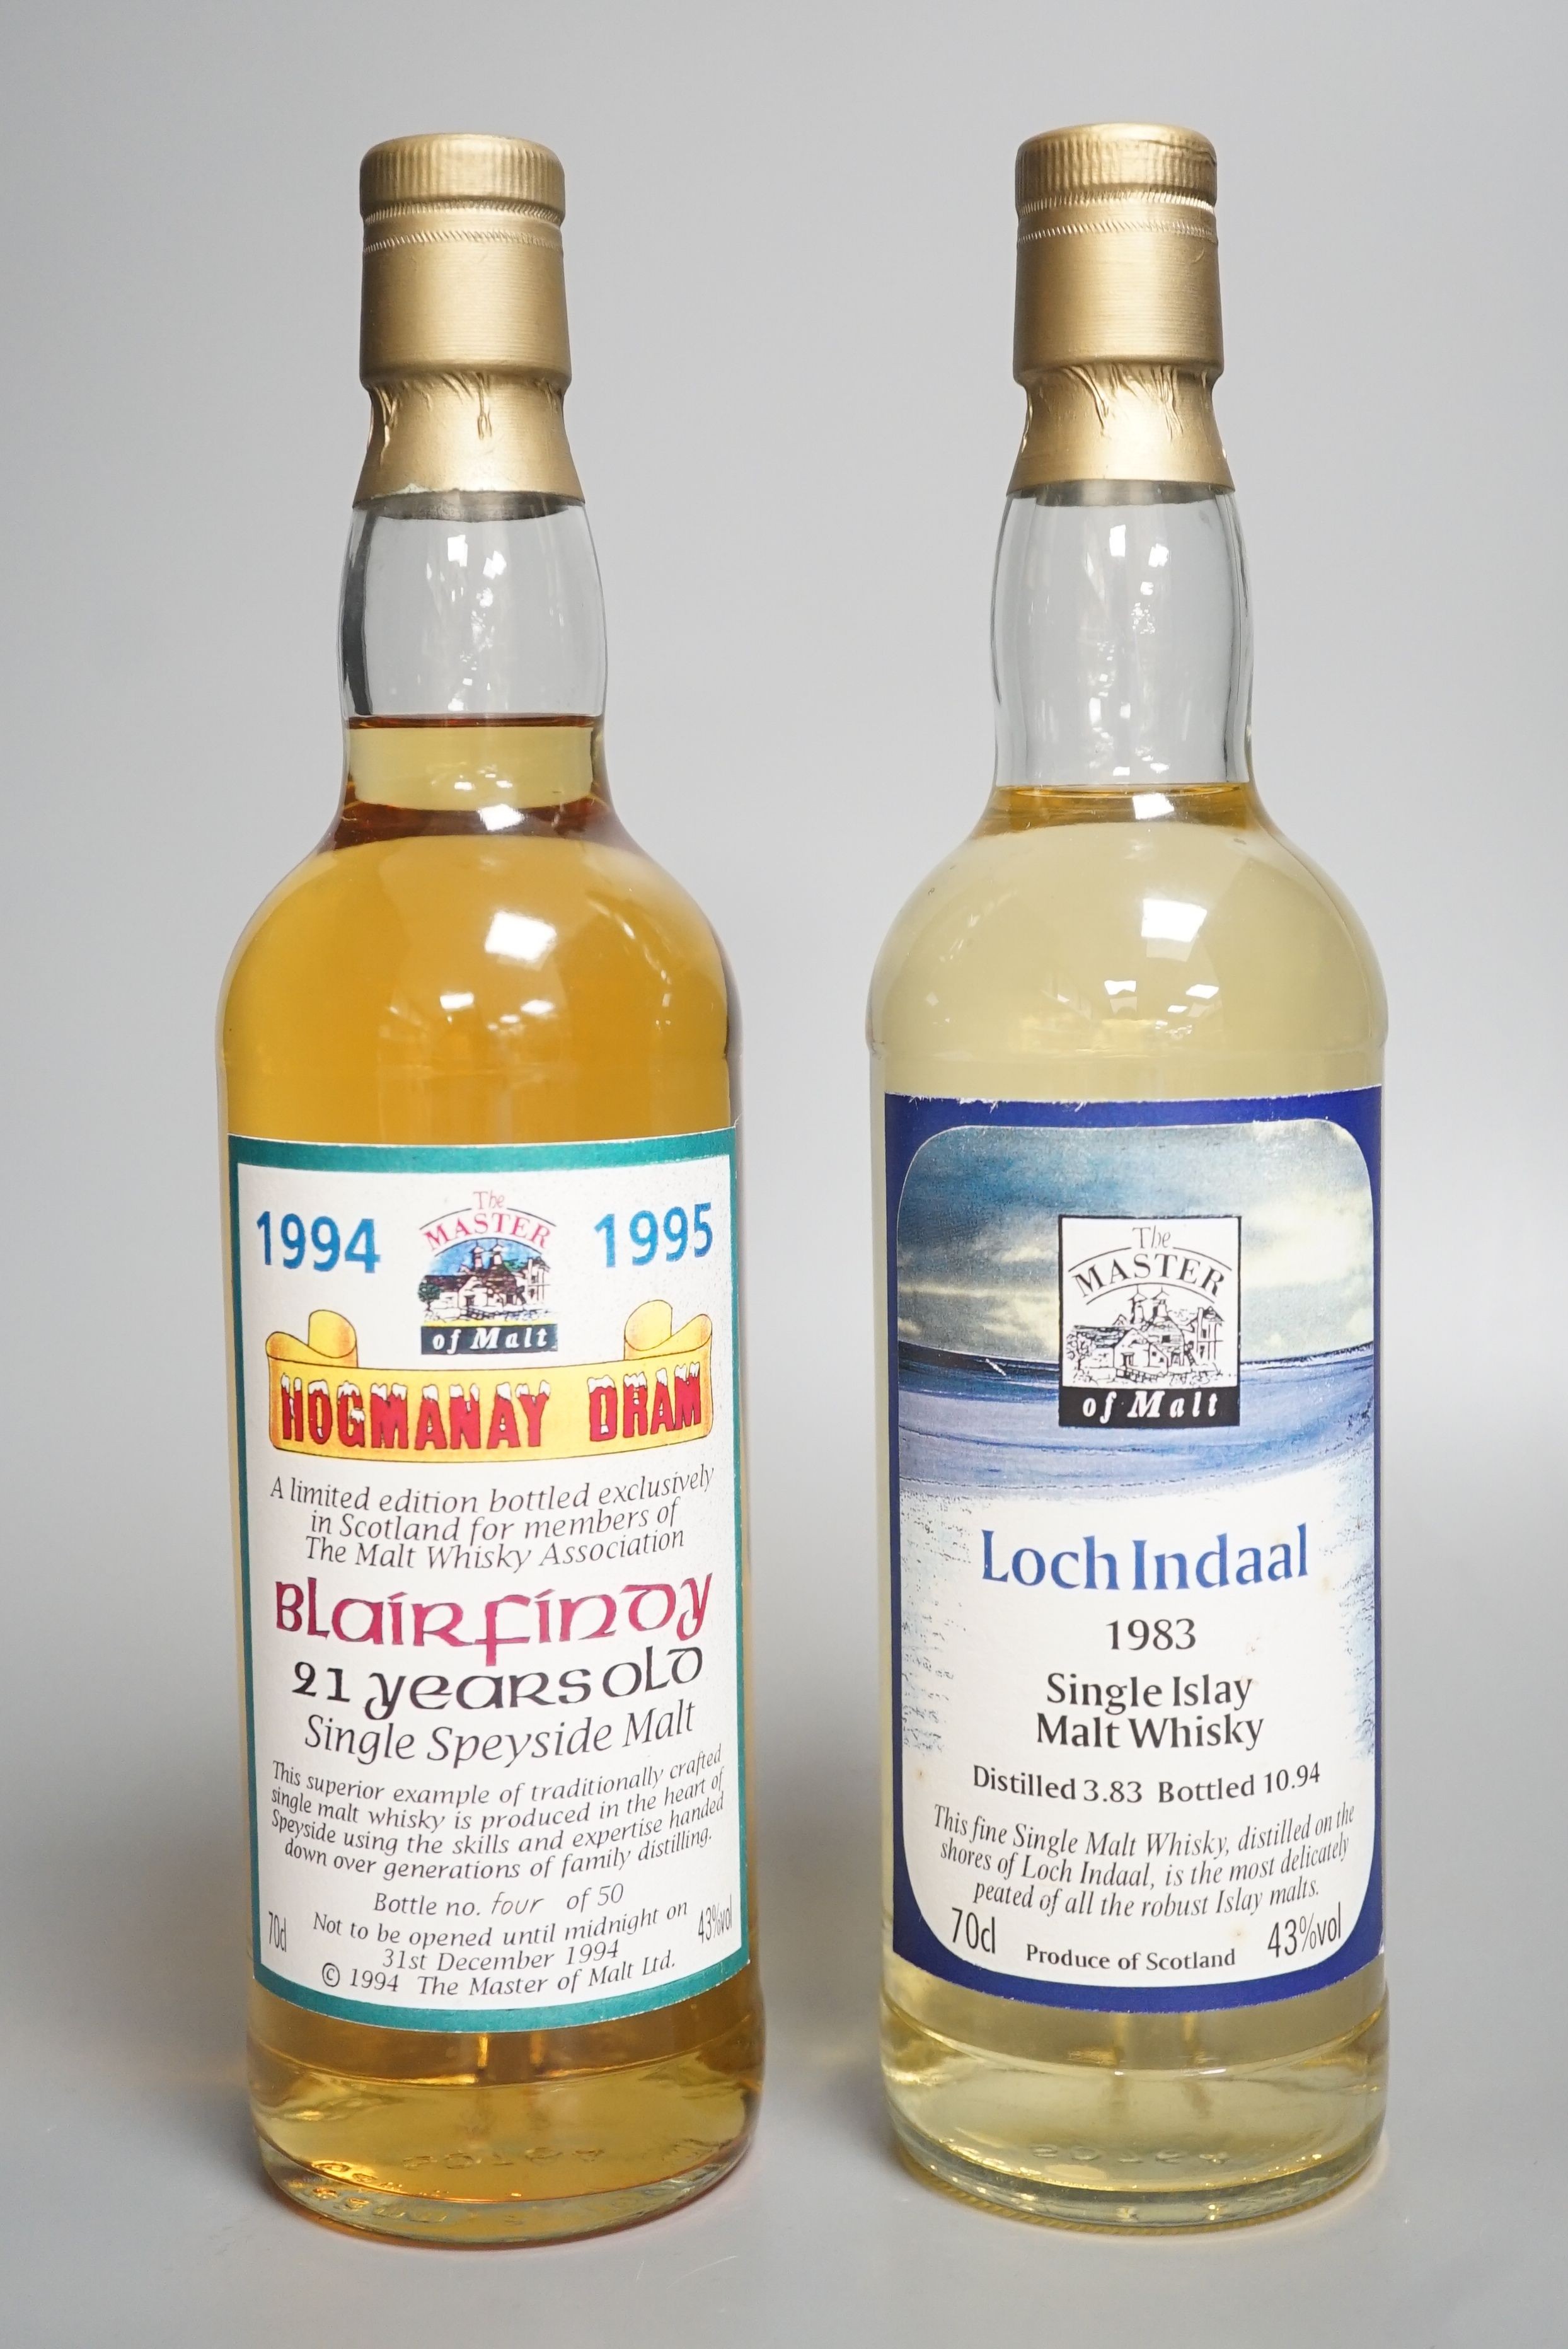 Two limited edition 'Master of Malt' series whiskies: 1983 Loch Indaal, distilled 3.83 bottled 10.94. together with 1994/5 21 year old Blairfinoy, bottle 4/50 'Not to be opened until midnight on 31 Dec 1994' (2)